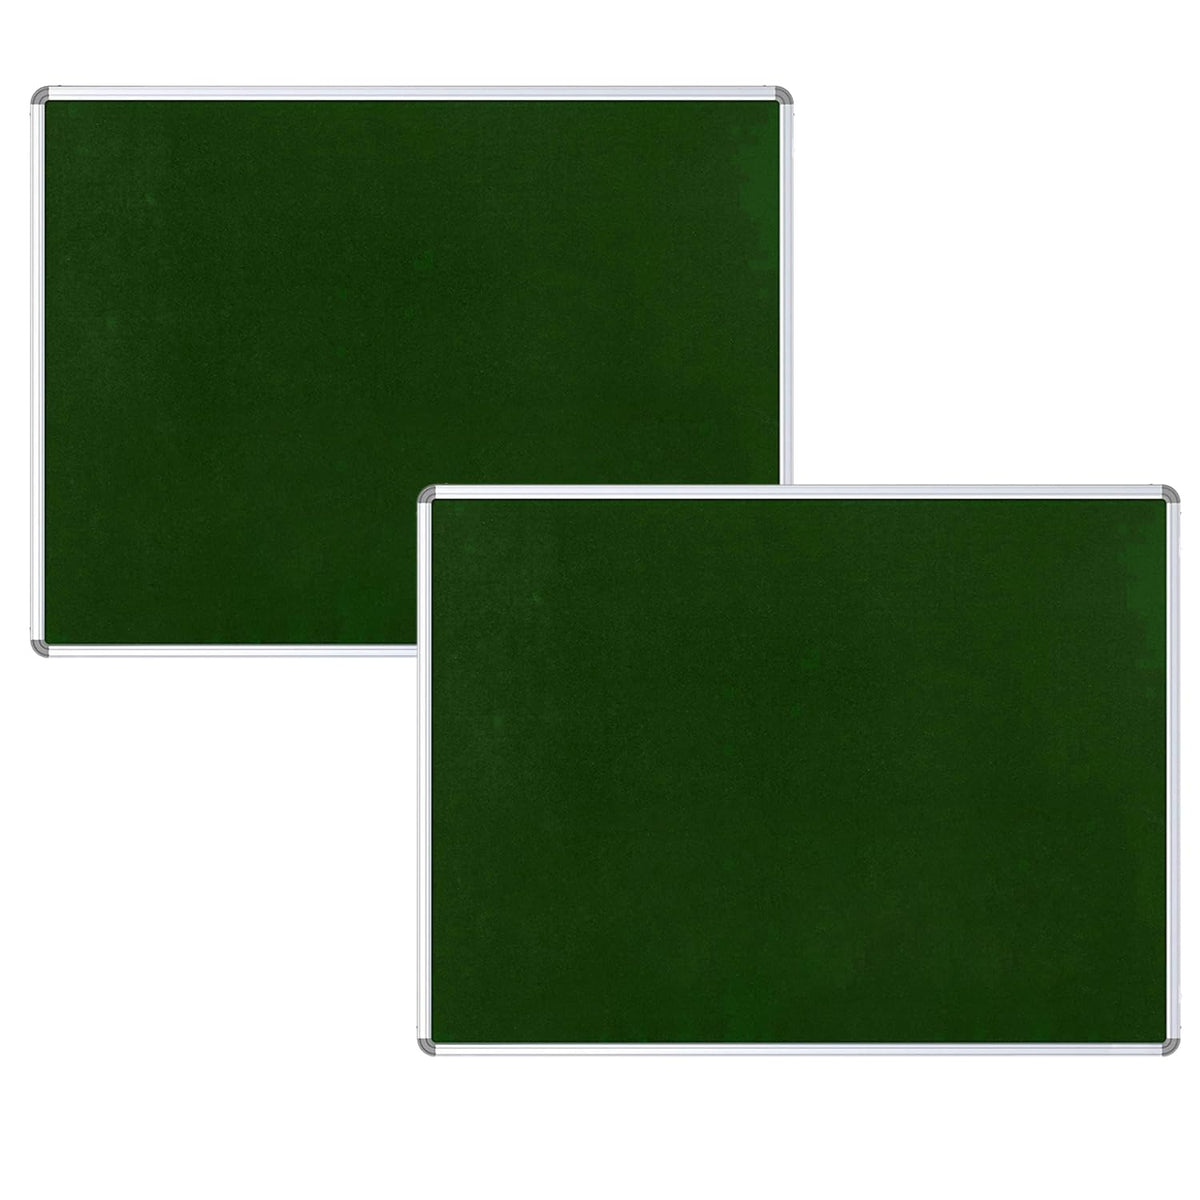 Kuber Industries- Pin-Up Board- 2 x 3 Feet-Pack of 2 (Green)